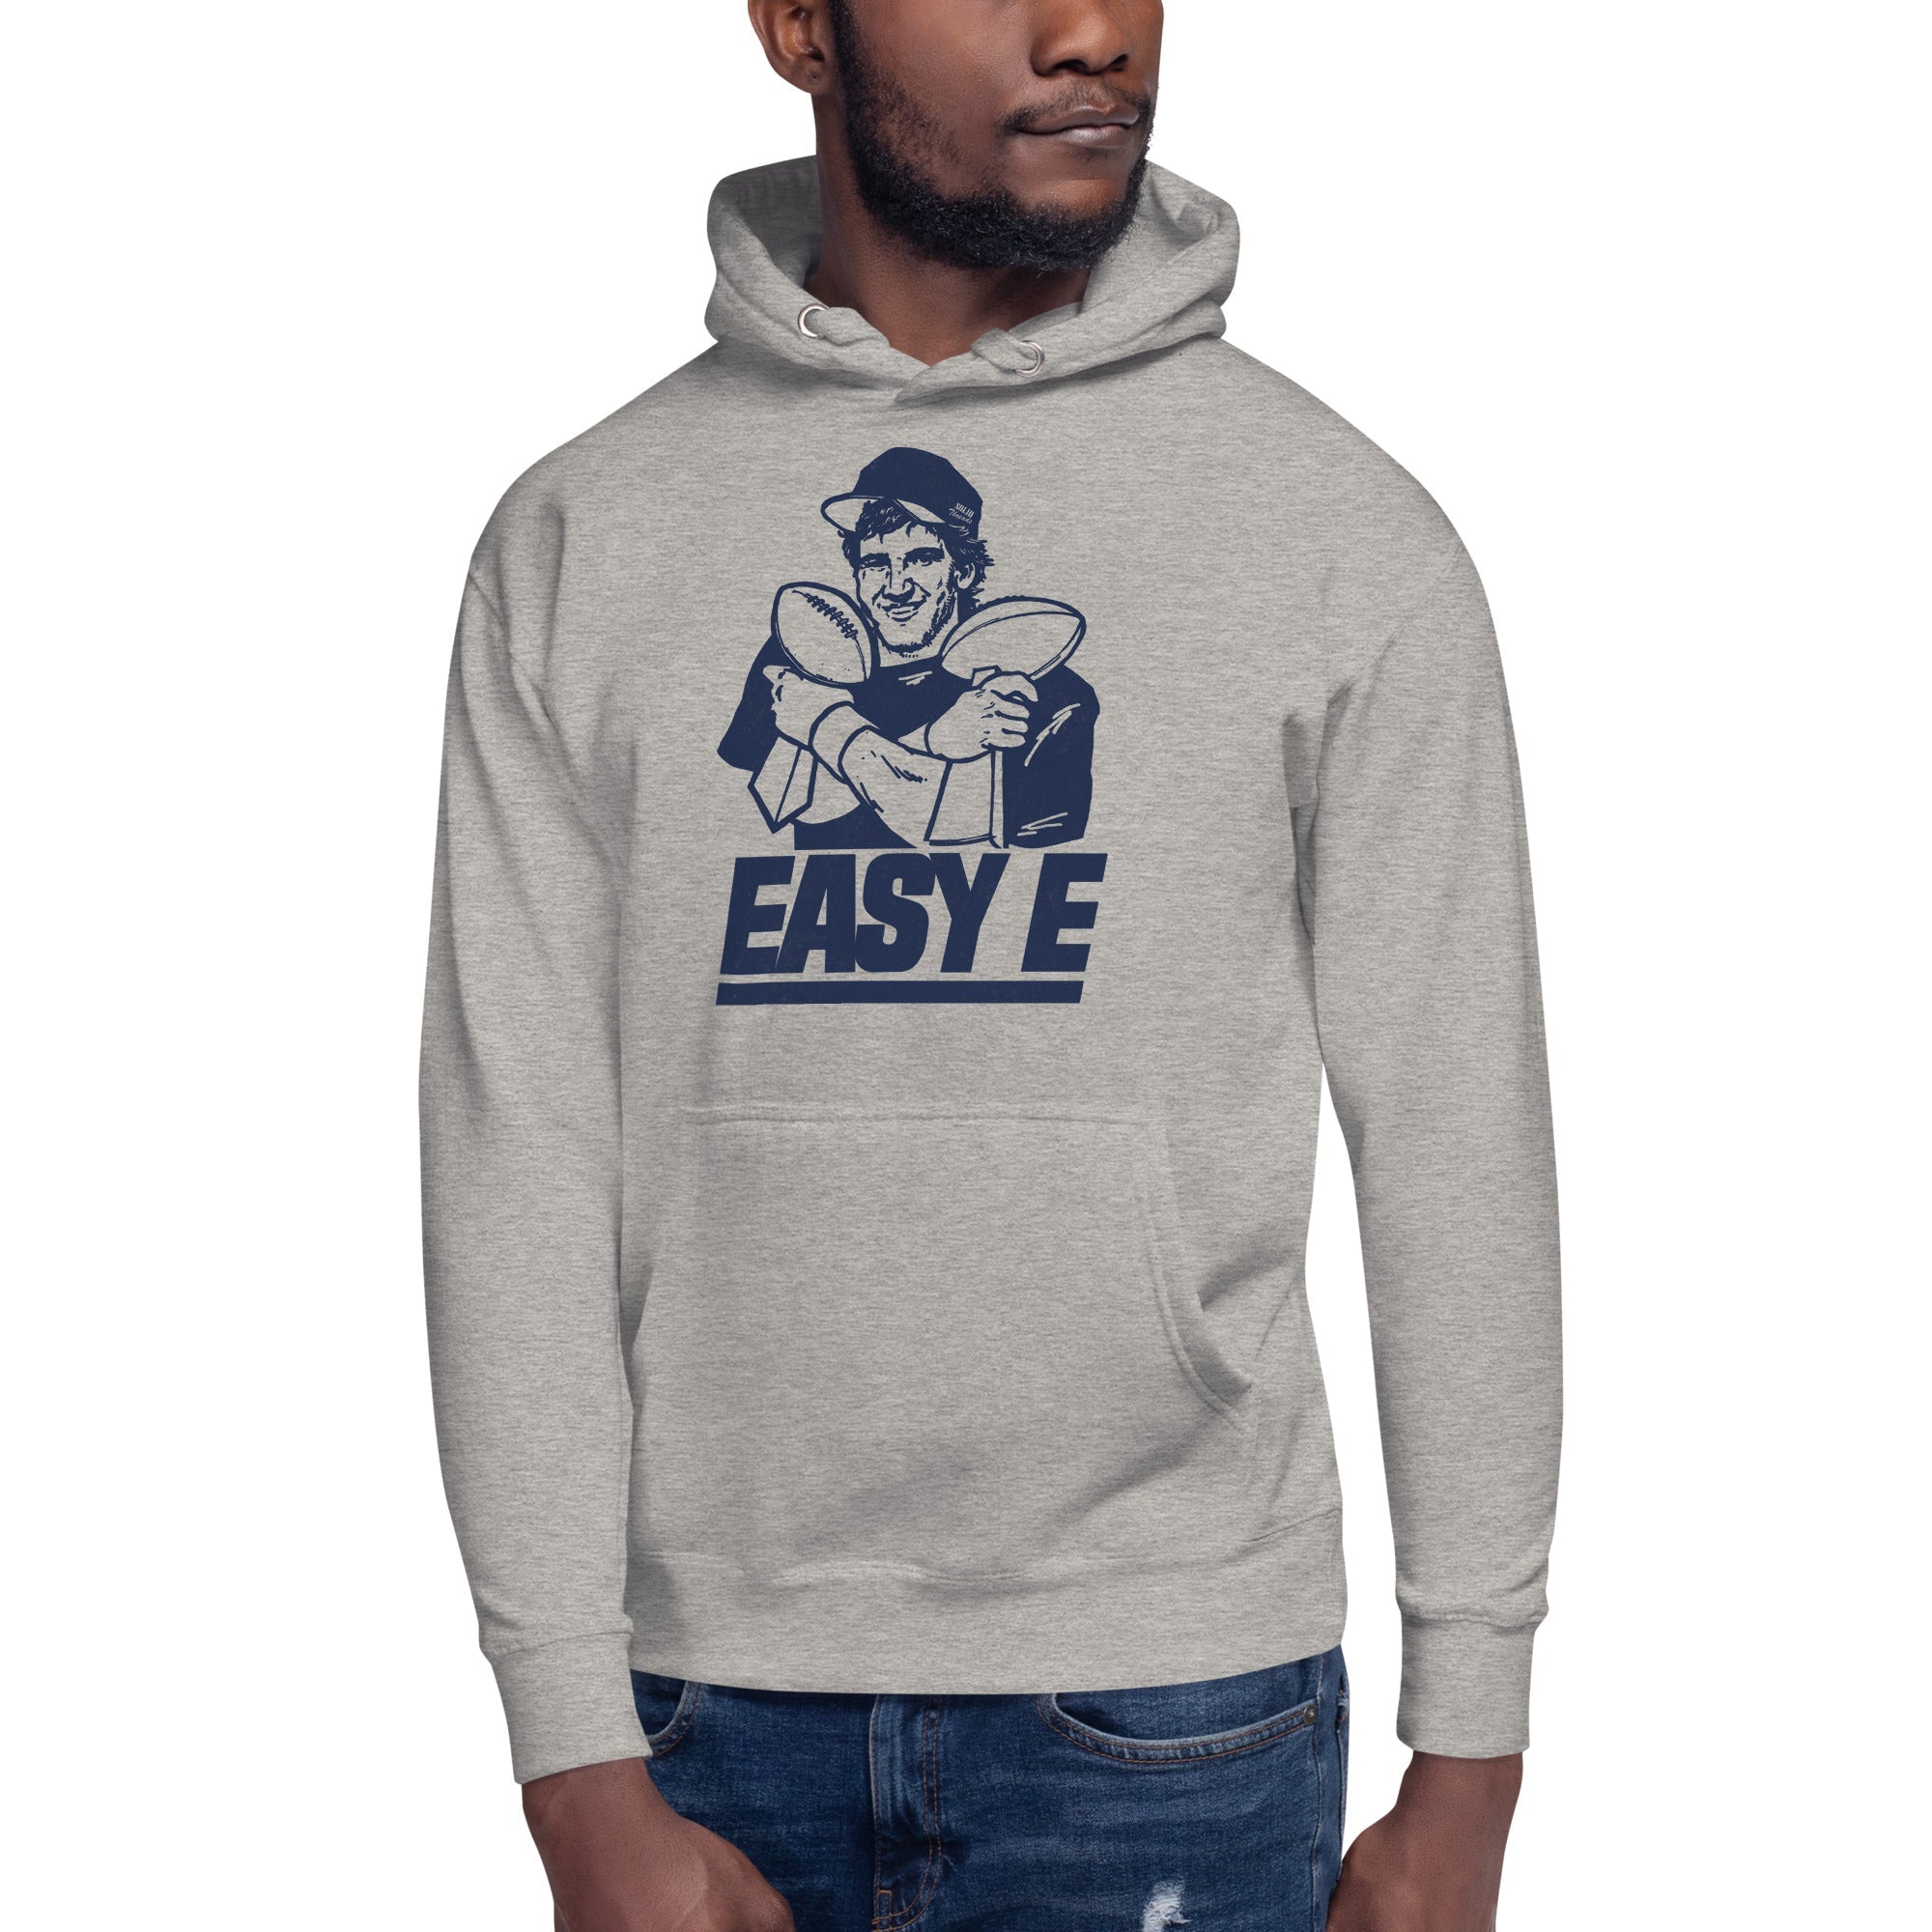 Easy E Vintage Classic Pullover Hoodie | Funny Ny Giants Fleece | Solid Threads